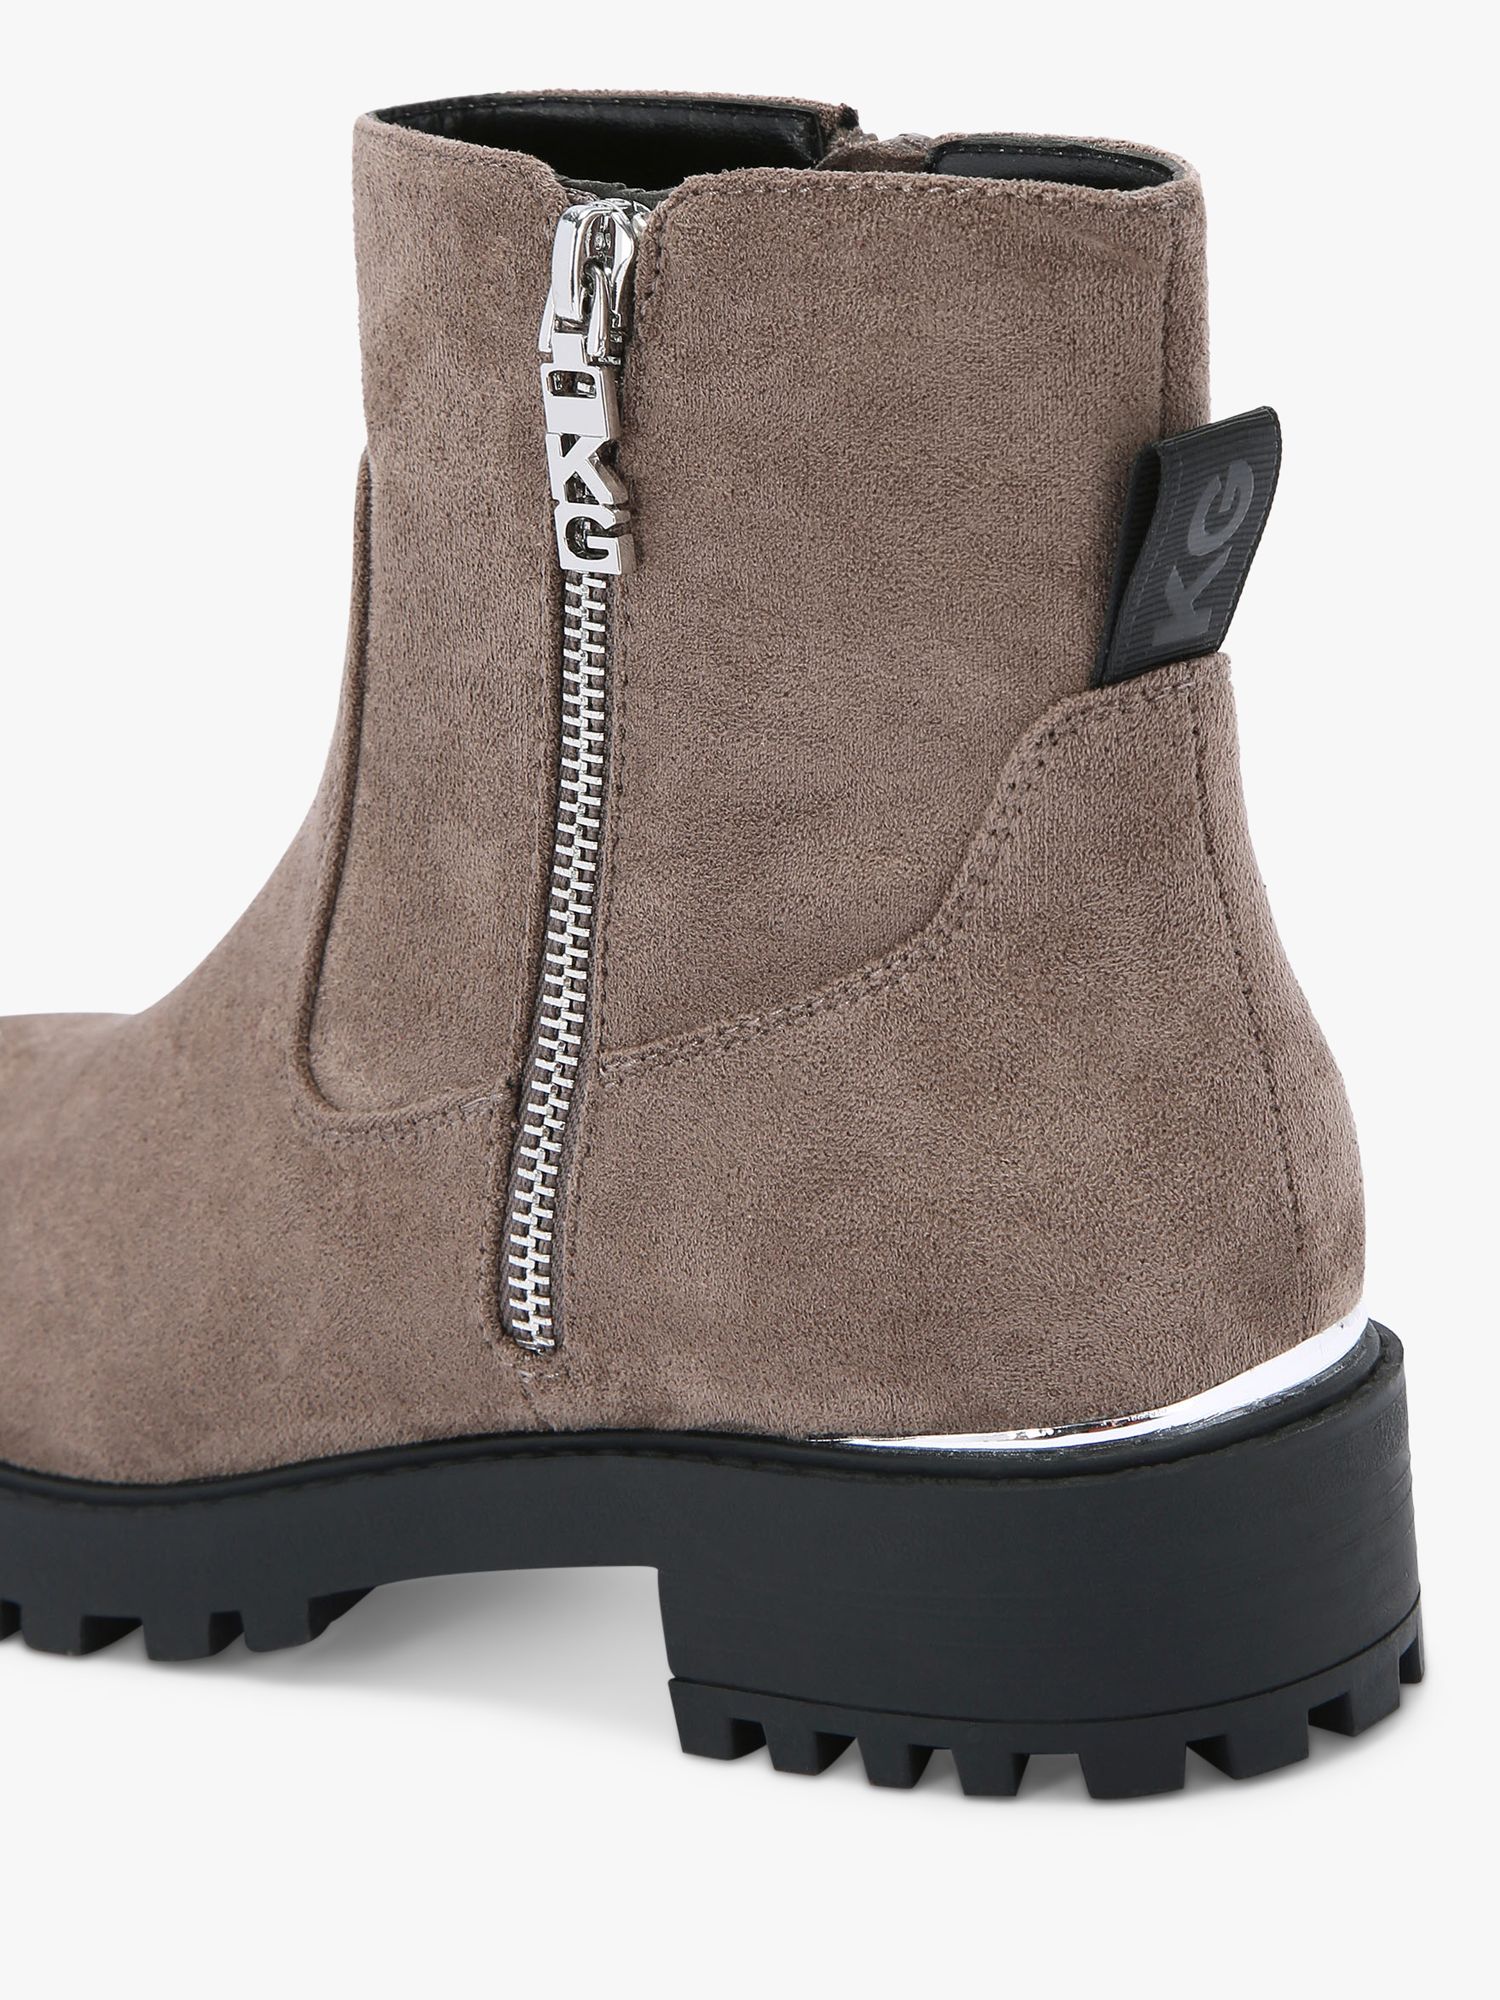 Buy KG Kurt Geiger Tahira Suede Ankle Boots, Taupe Online at johnlewis.com